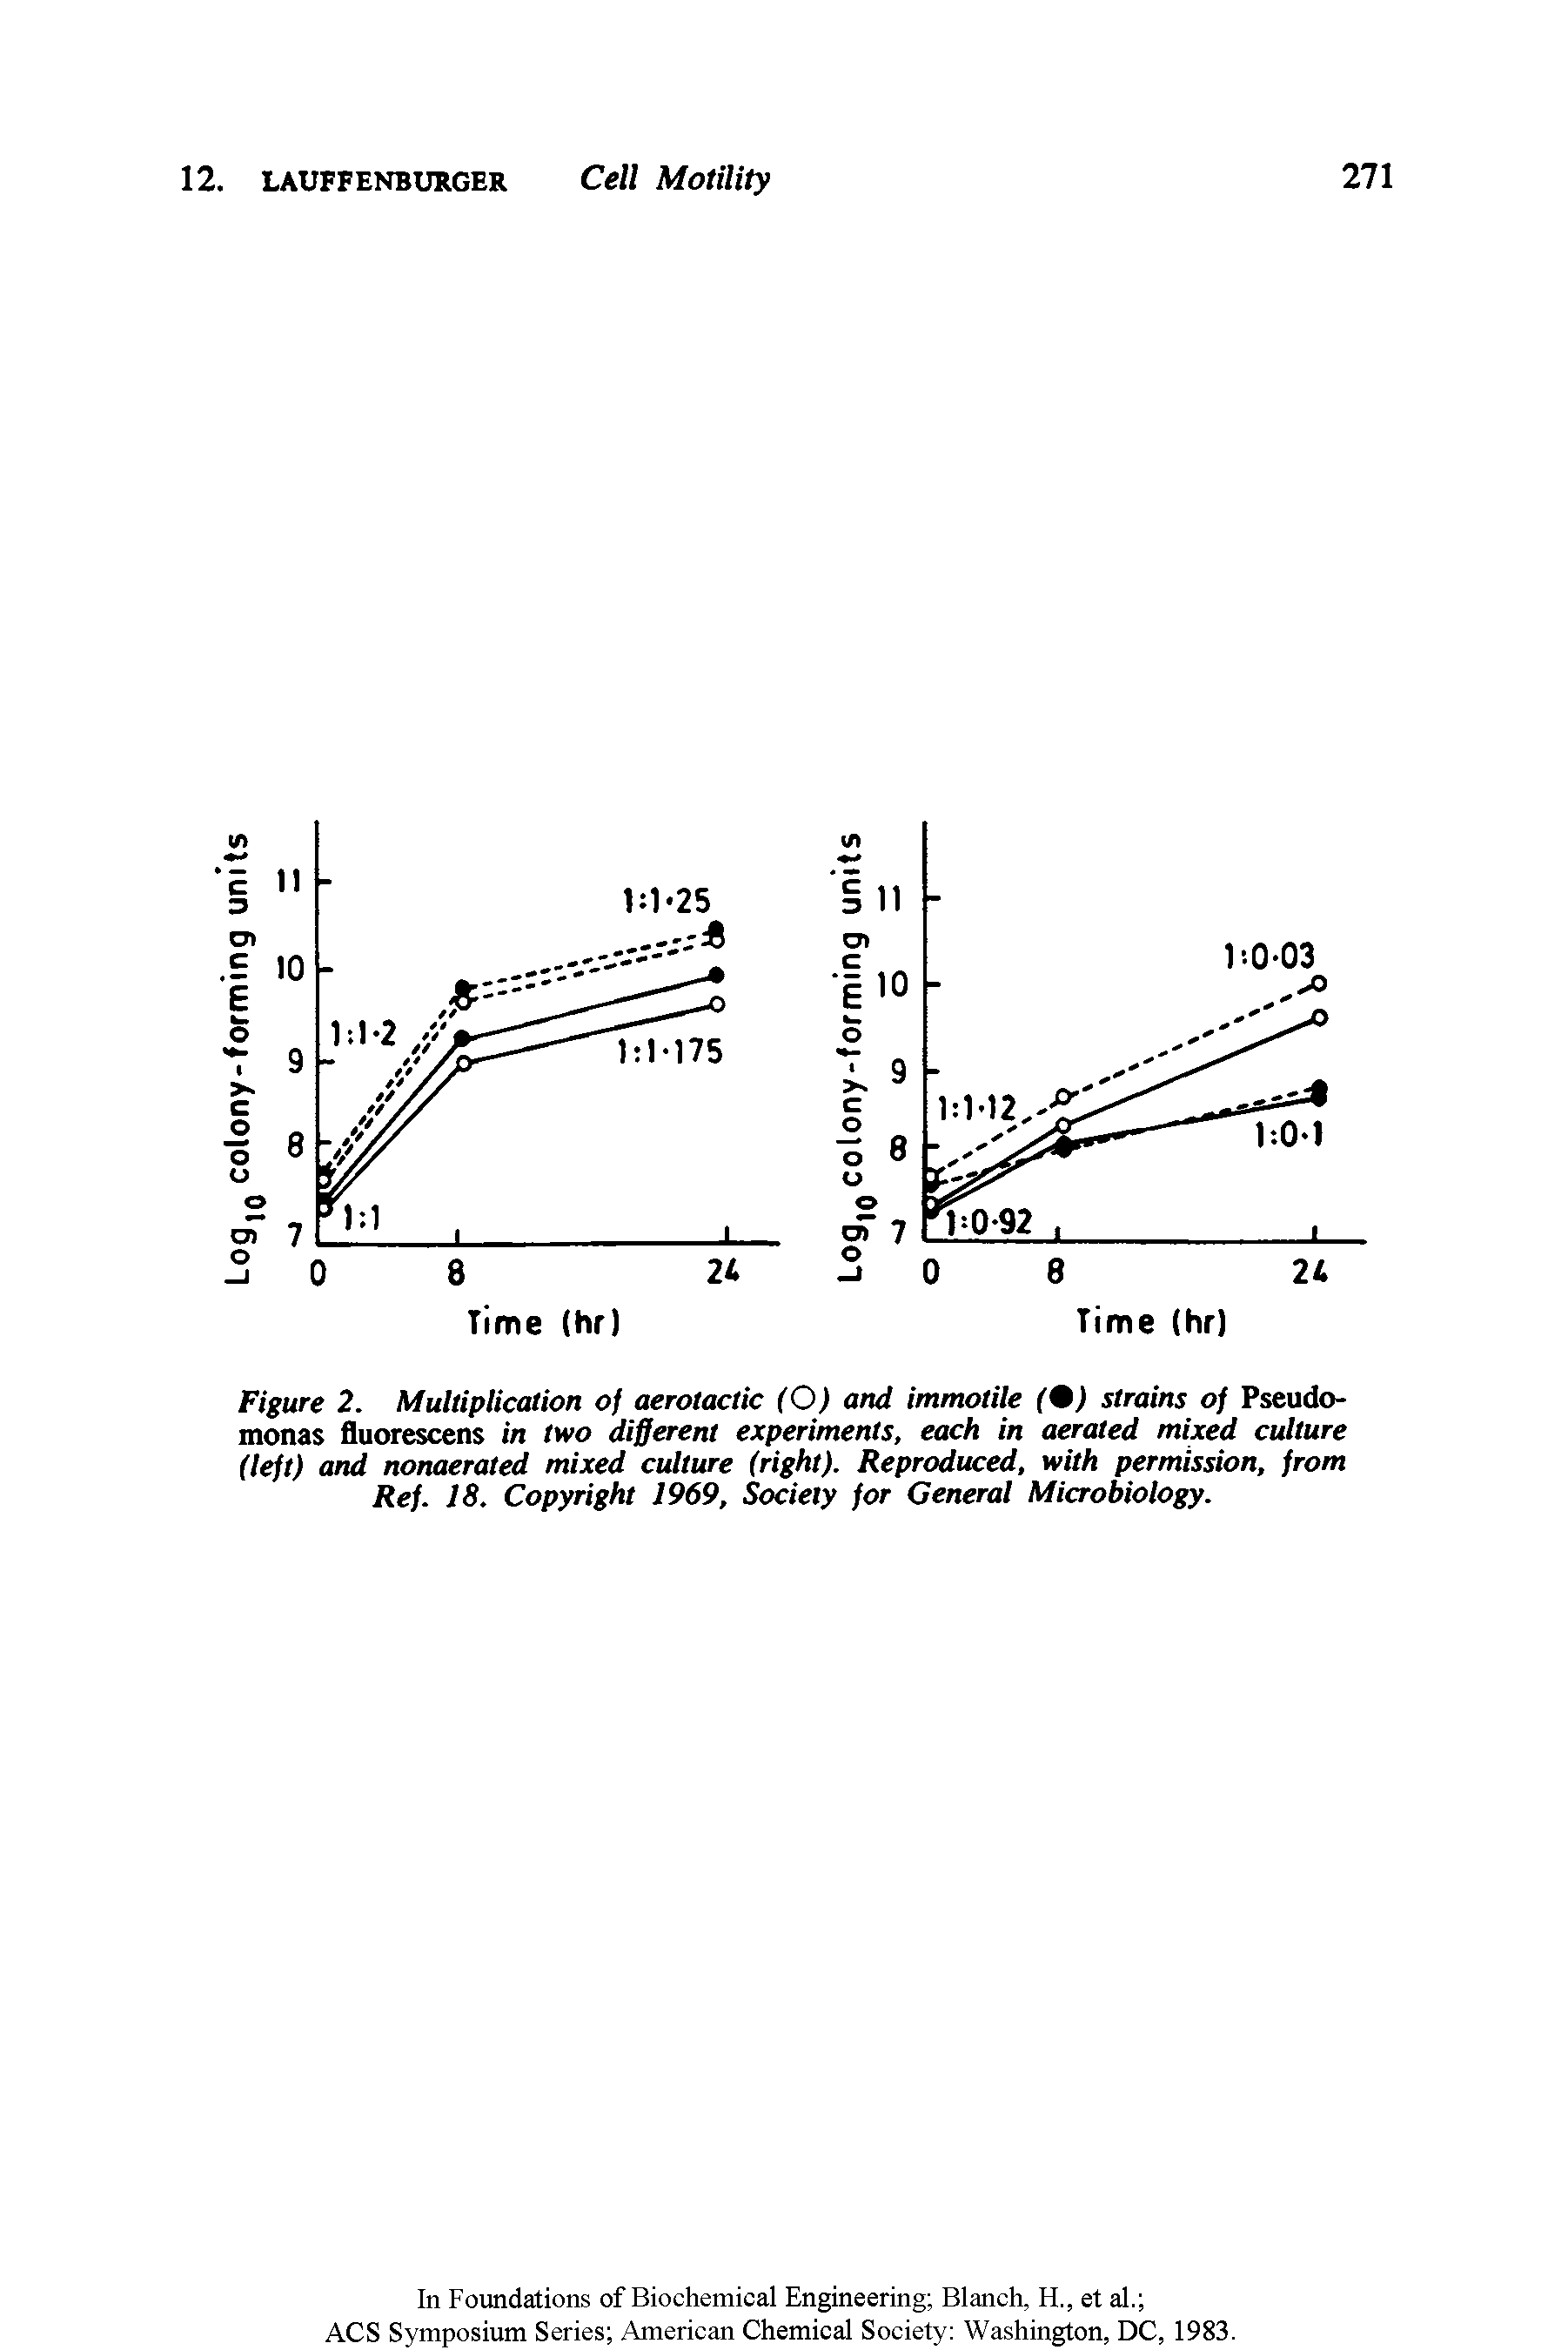 Figure 2. Multiplication of aerotactic (O) and immotile (9) strains of Pseudomonas fluorescens in two different experiments, each in aerated mixed culture (left) and nonaerated mixed culture (right). Reproduced, with permission, from Ref. 18. Copyright 1969, Society for General Microbiology.